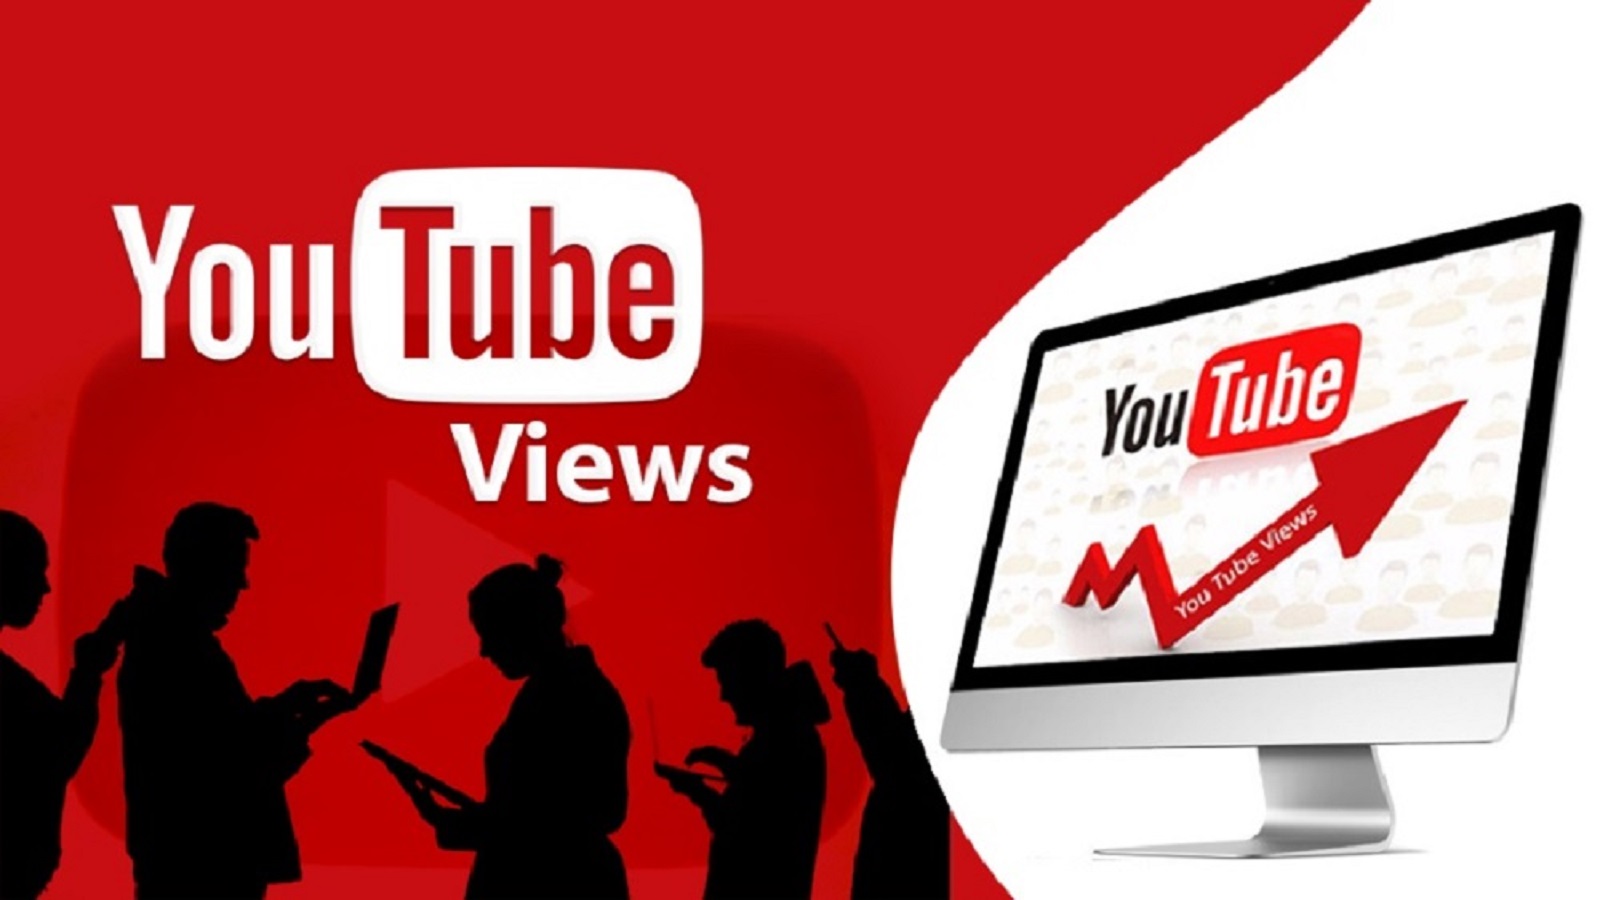 buy youtube views from usa, buy youtube views, buy youtube views USA, youtube views, USA views, youtube marketing, boost your reach, increase youtube views, USA youtube audience, youtube strategy, youtube promotion, organic views, genuine engagement, youtube algorithm, youtube ranking, youtube success, youtube growth, Buyyoutubeviews